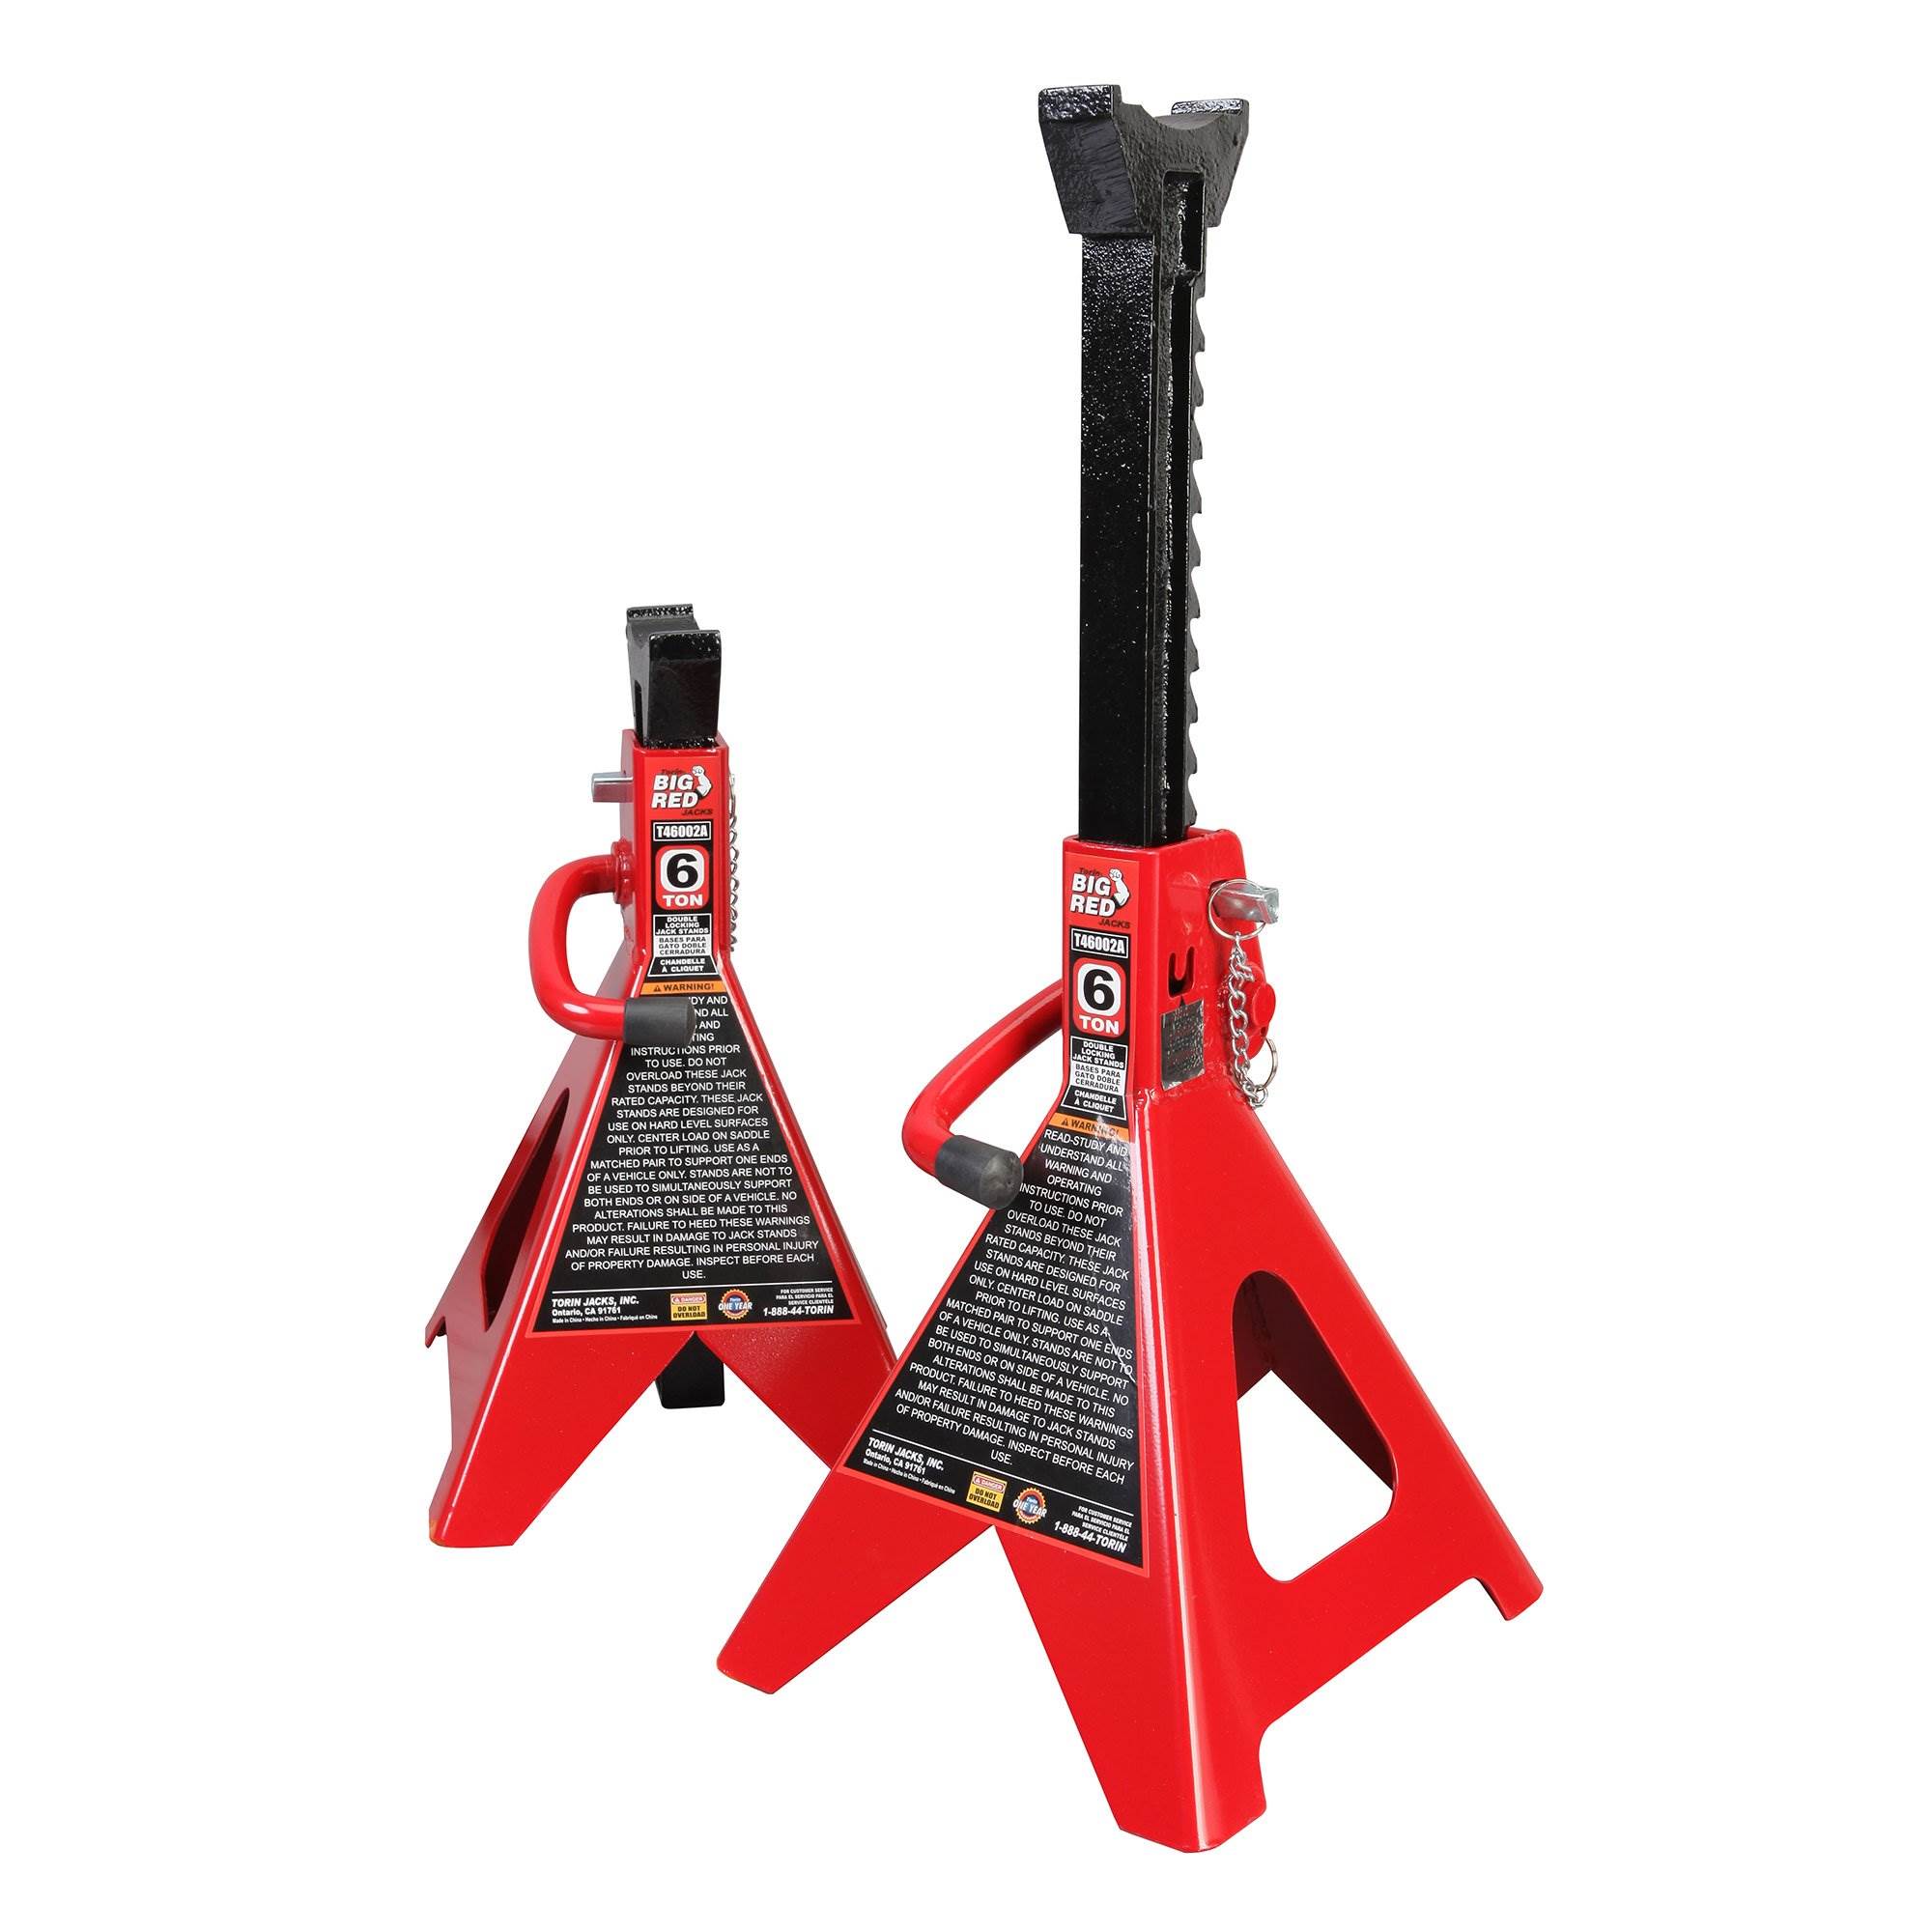 Torin Big Red 6 Ton Capacity Heavy Duty Double Locking Steel Jack Stands, 1 Pair - image 1 of 7